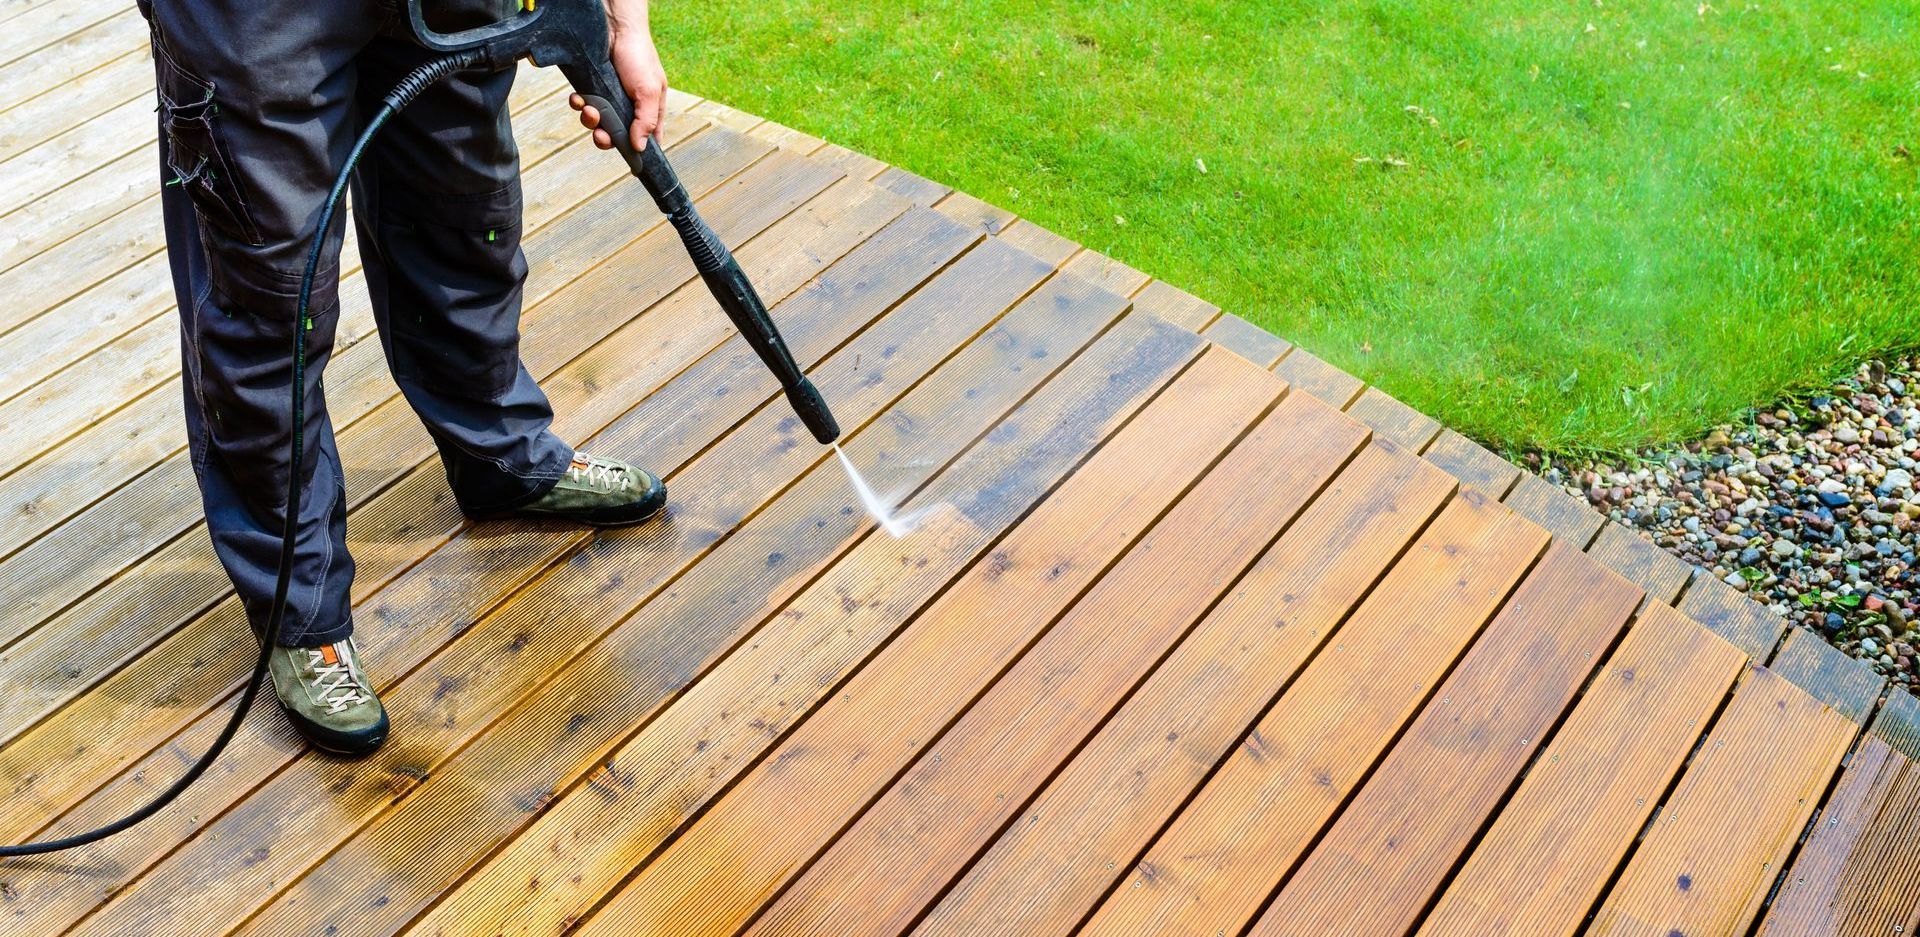 Best Residential Power Washing Company- Power Washer Rosedale, MD